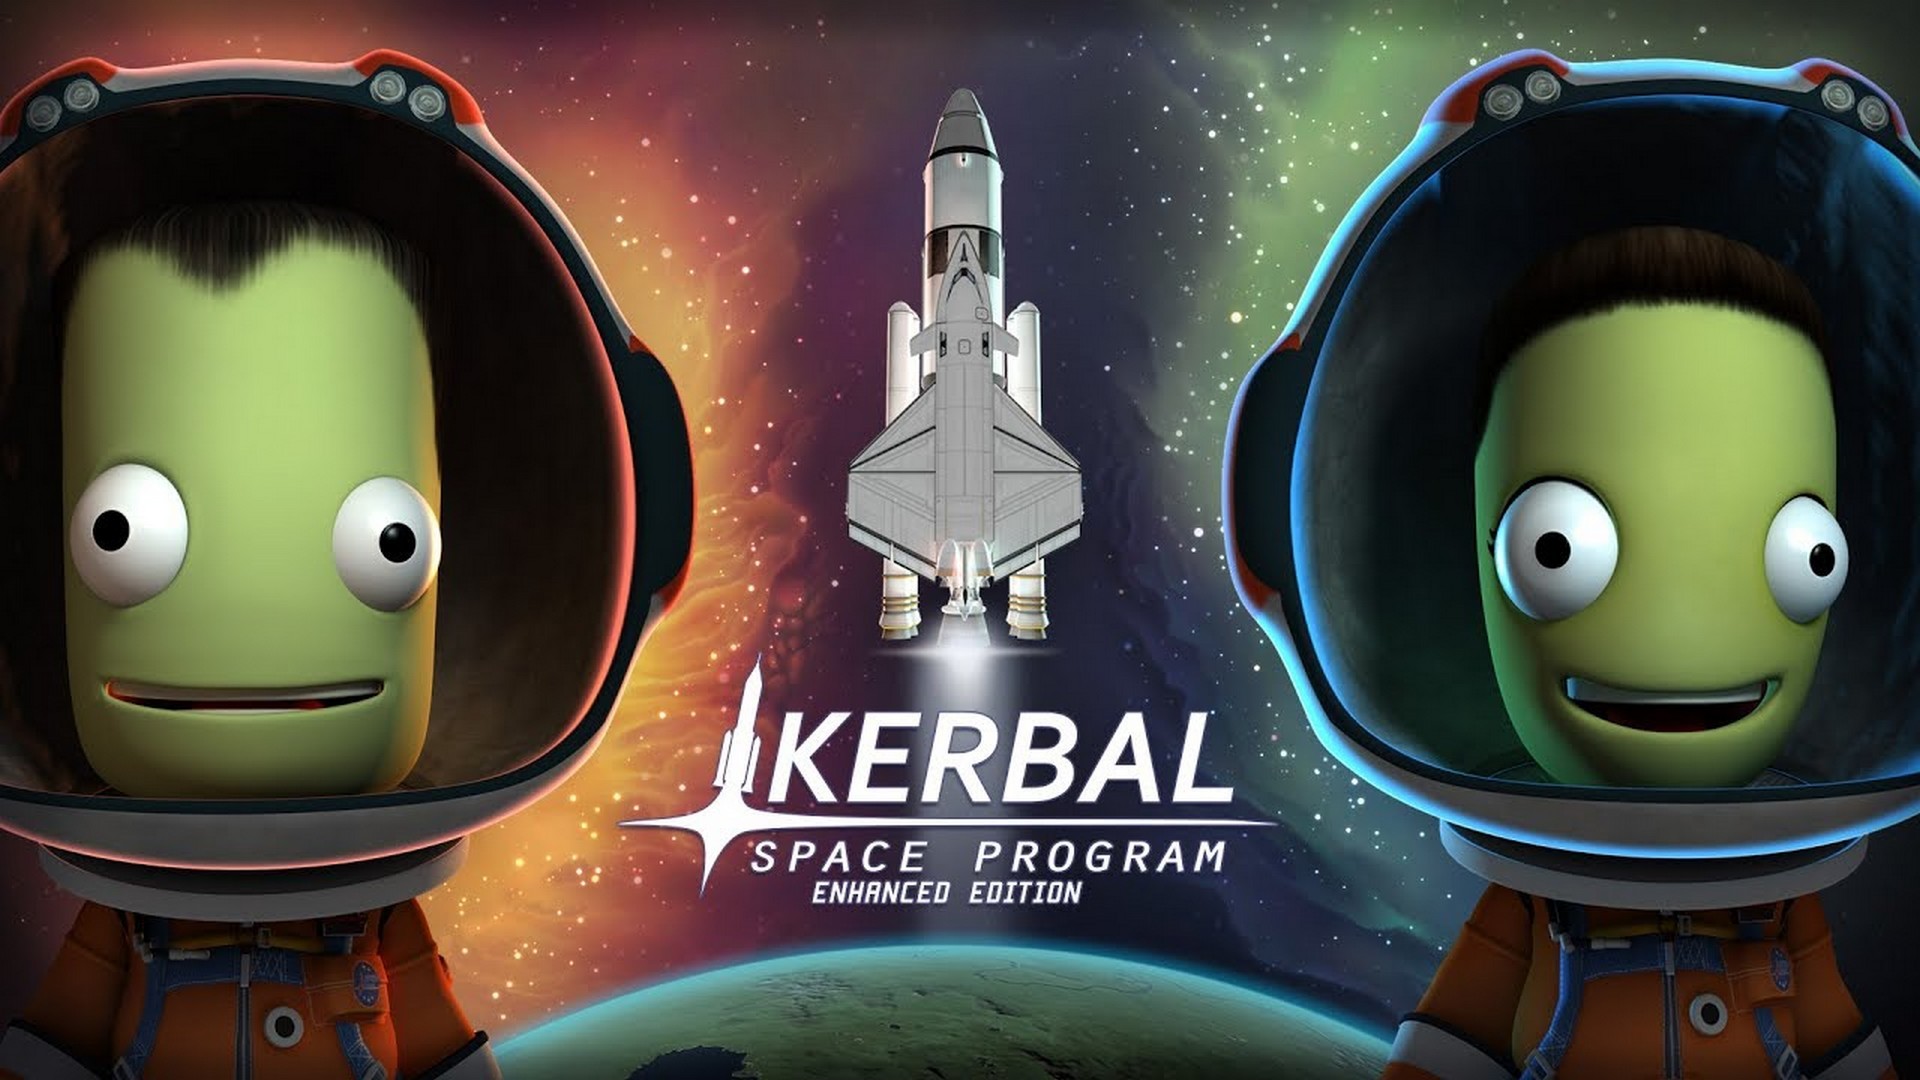 Private Division Announces Kerbal Space Program Enhanced Edition Coming to PlayStation 5 & Xbox Series X|S This Fall